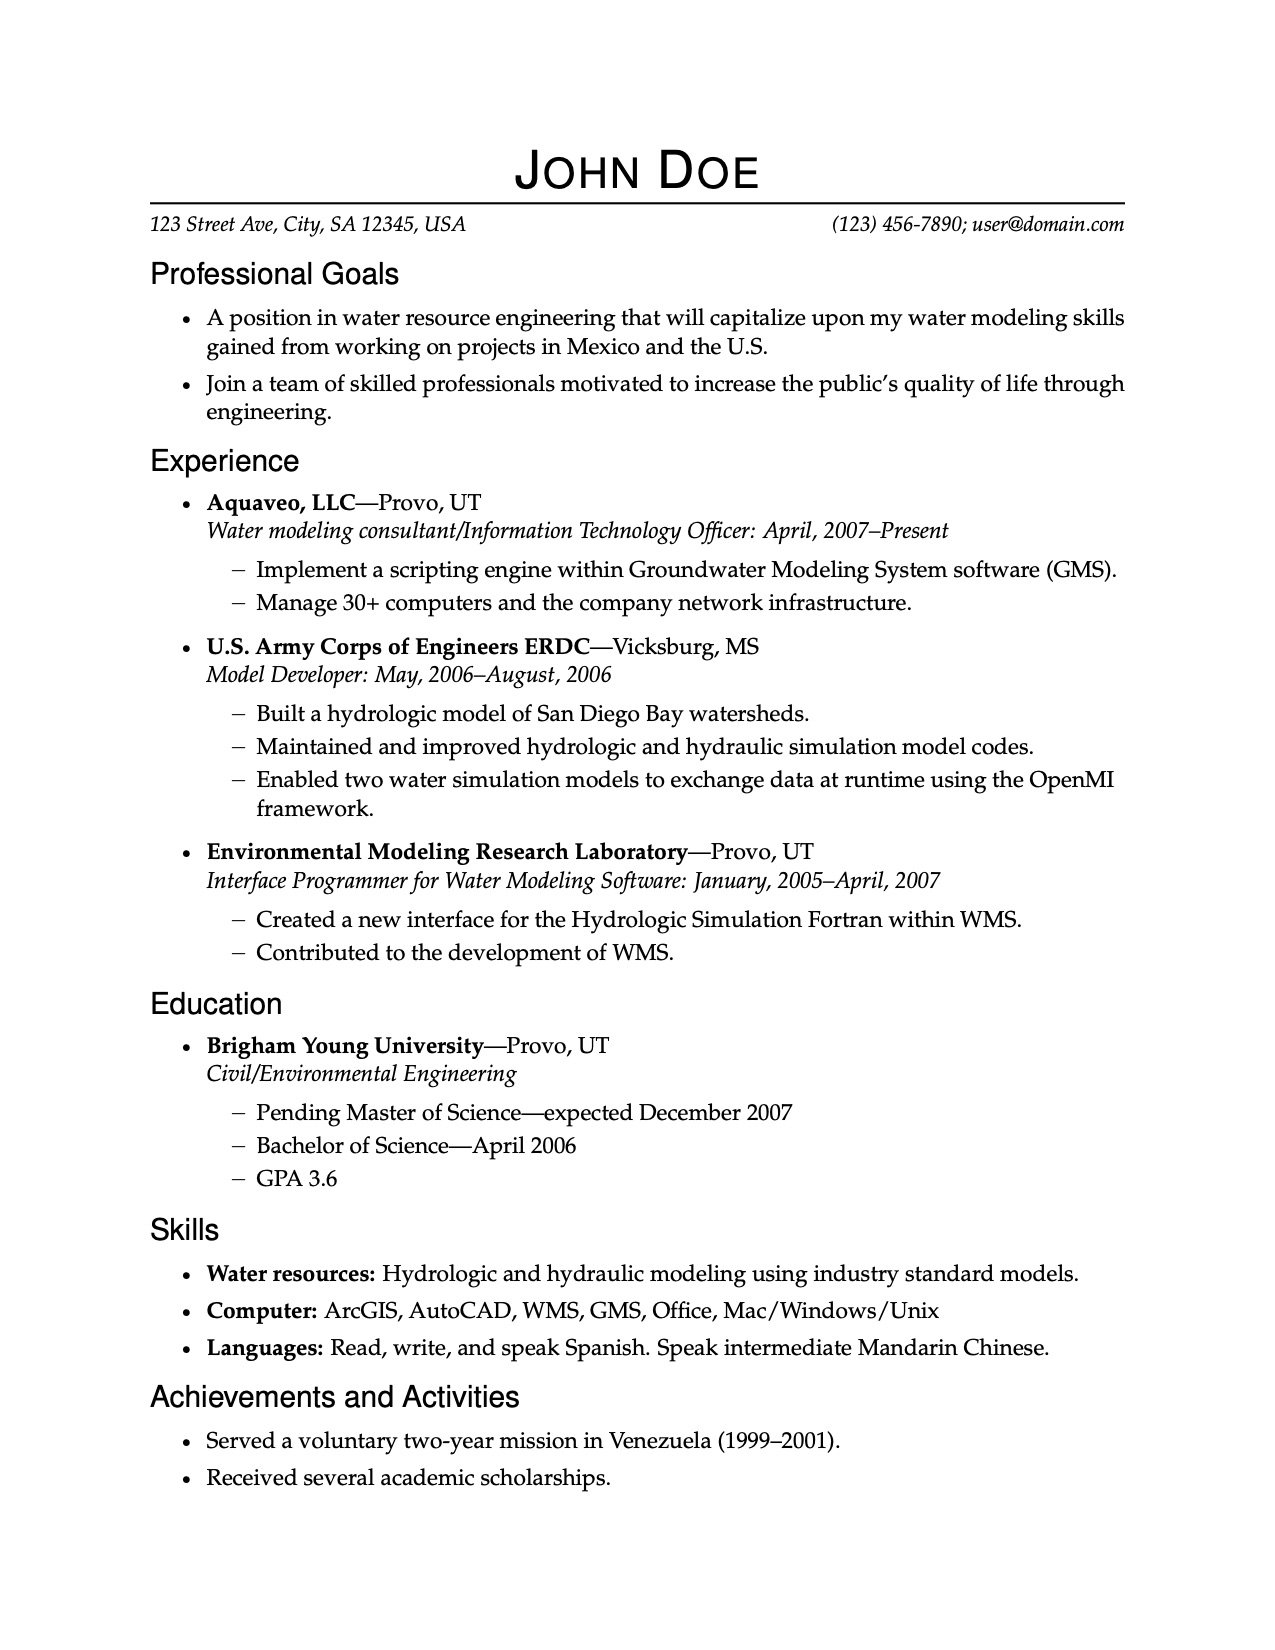 How do you create a resume on macOS using LaTeX ...